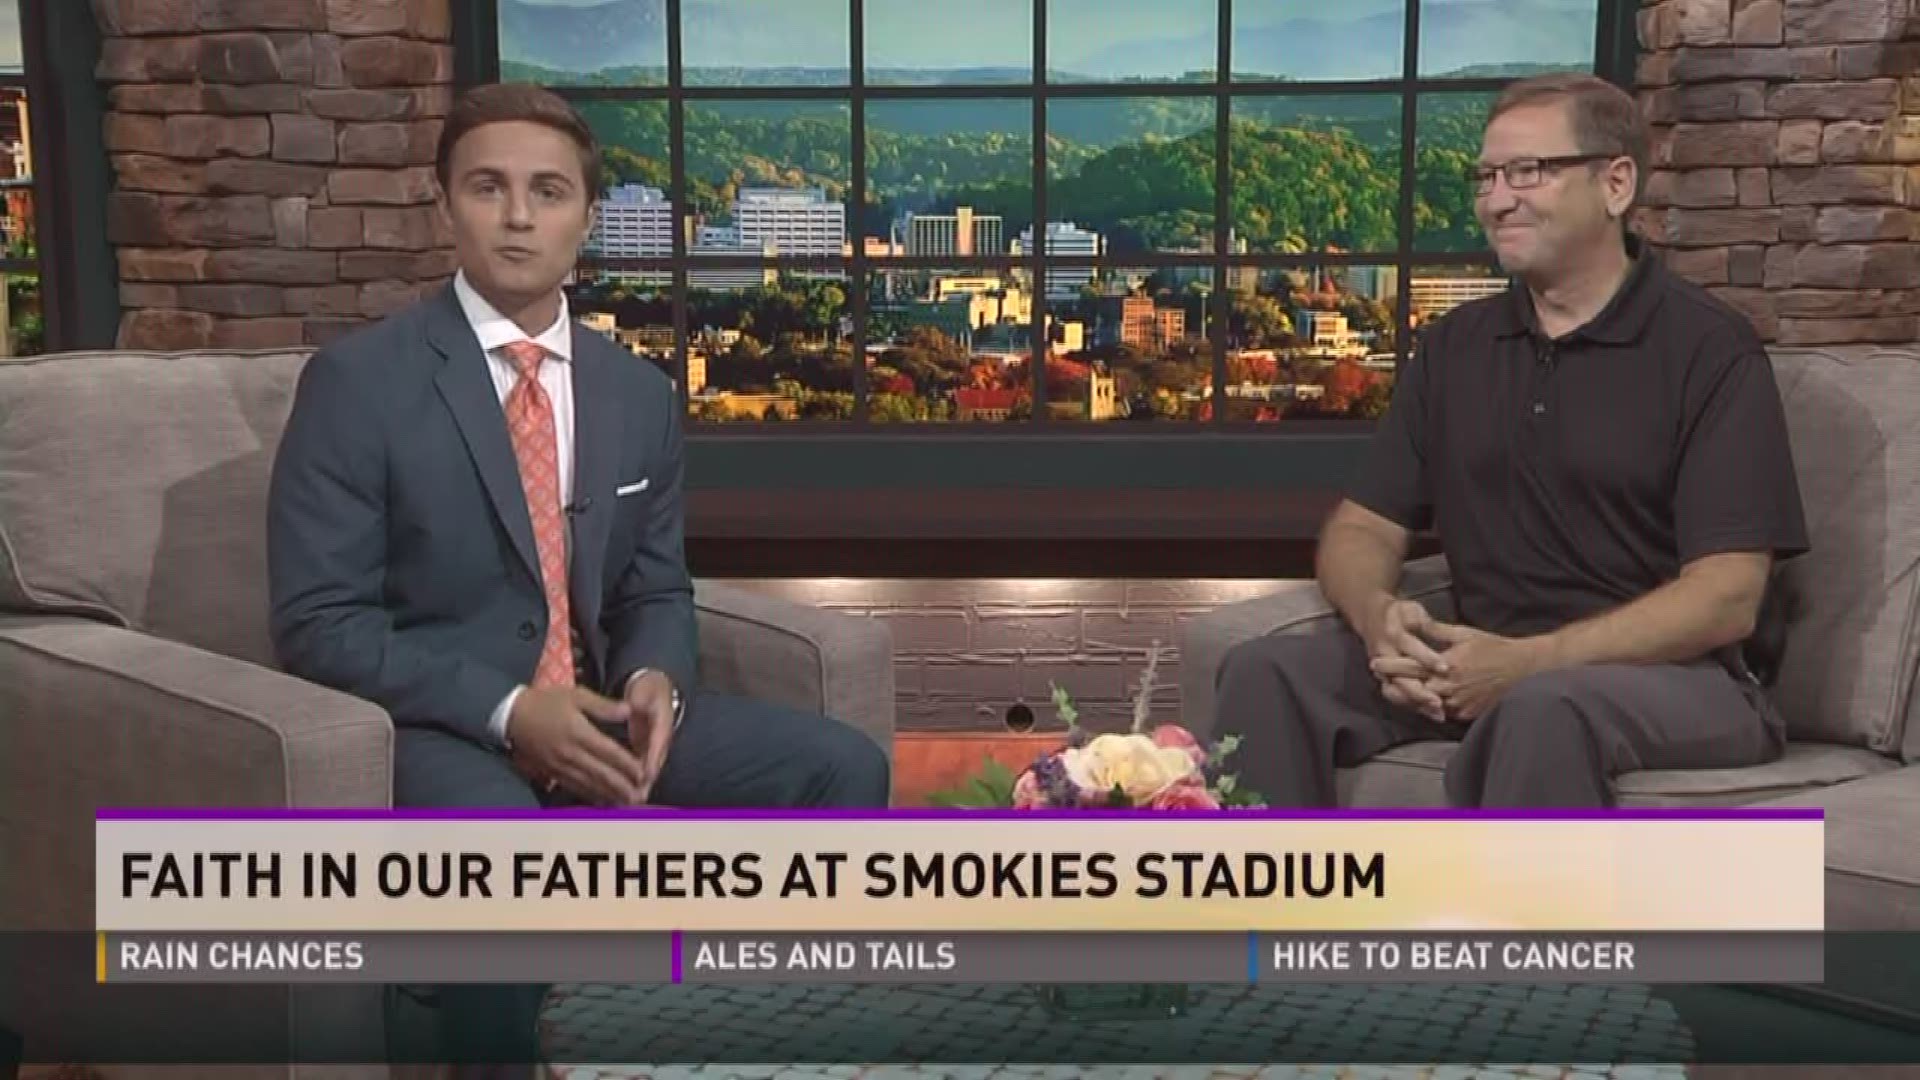 Jeff McElroy shares the details about a faith-based event in the Smokies.